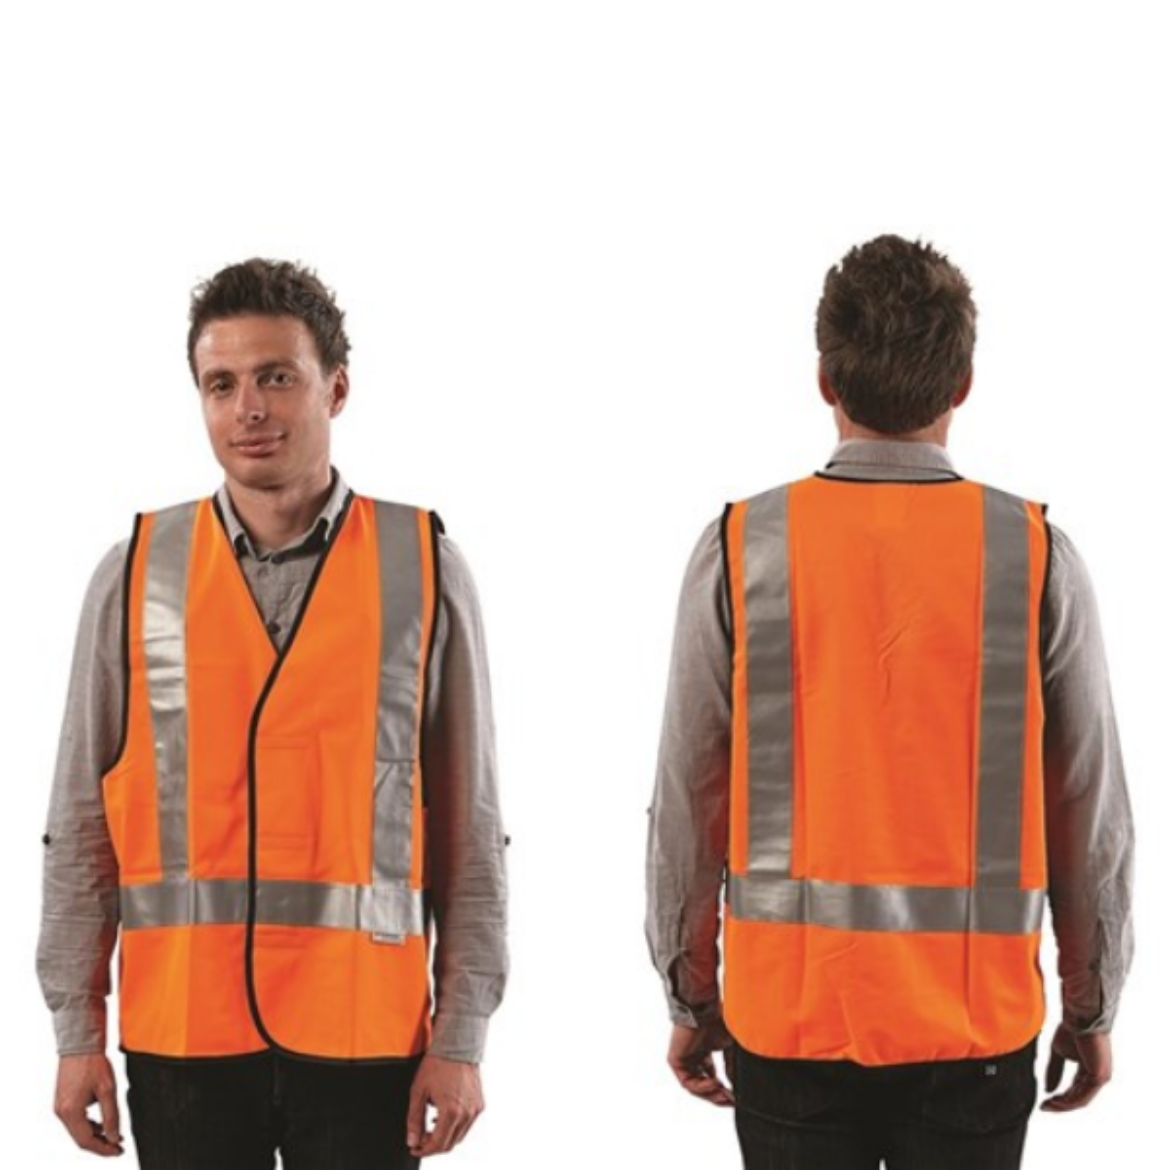 Picture of ORANGE VEST DAY/NIGHT USE WITH H BACK PATTERN REFLECTIVE TAPE. AVAILABLE IN SIZES S/M/L/XL/2XL/3XL/4XL